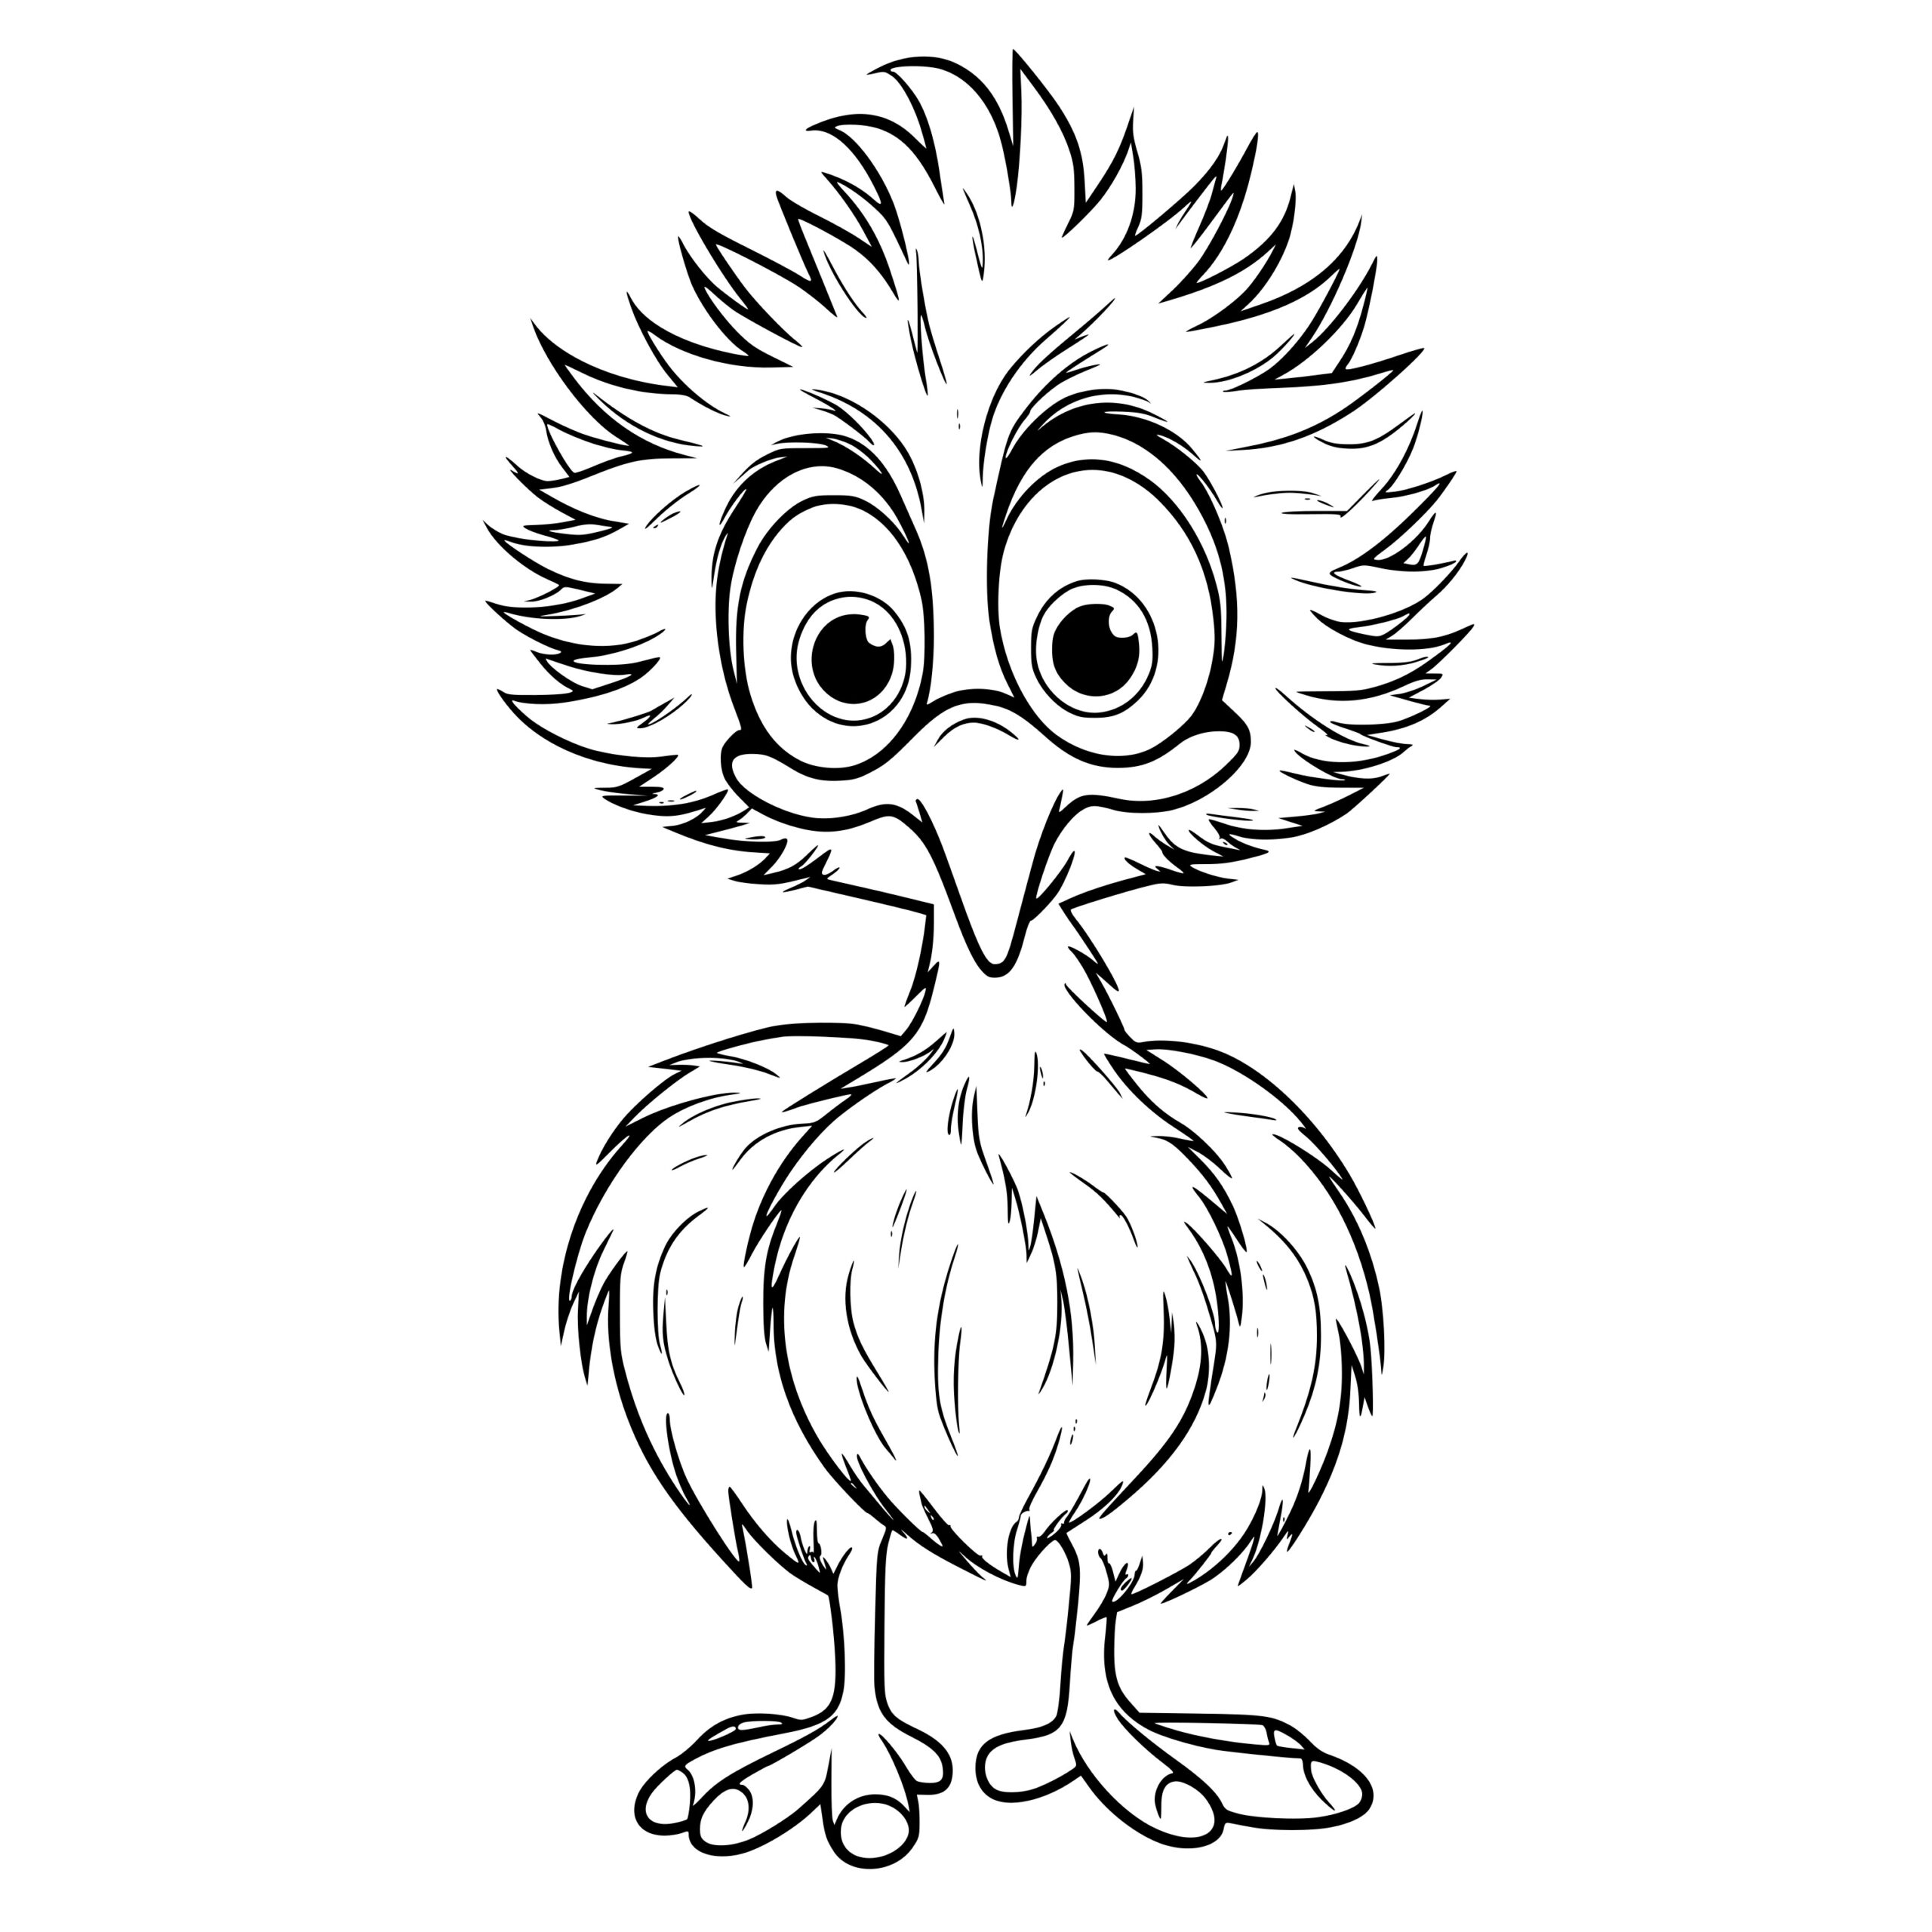 Frazzled Emu SVG Image: Perfect for Cricut, Silhouette, Laser Machines